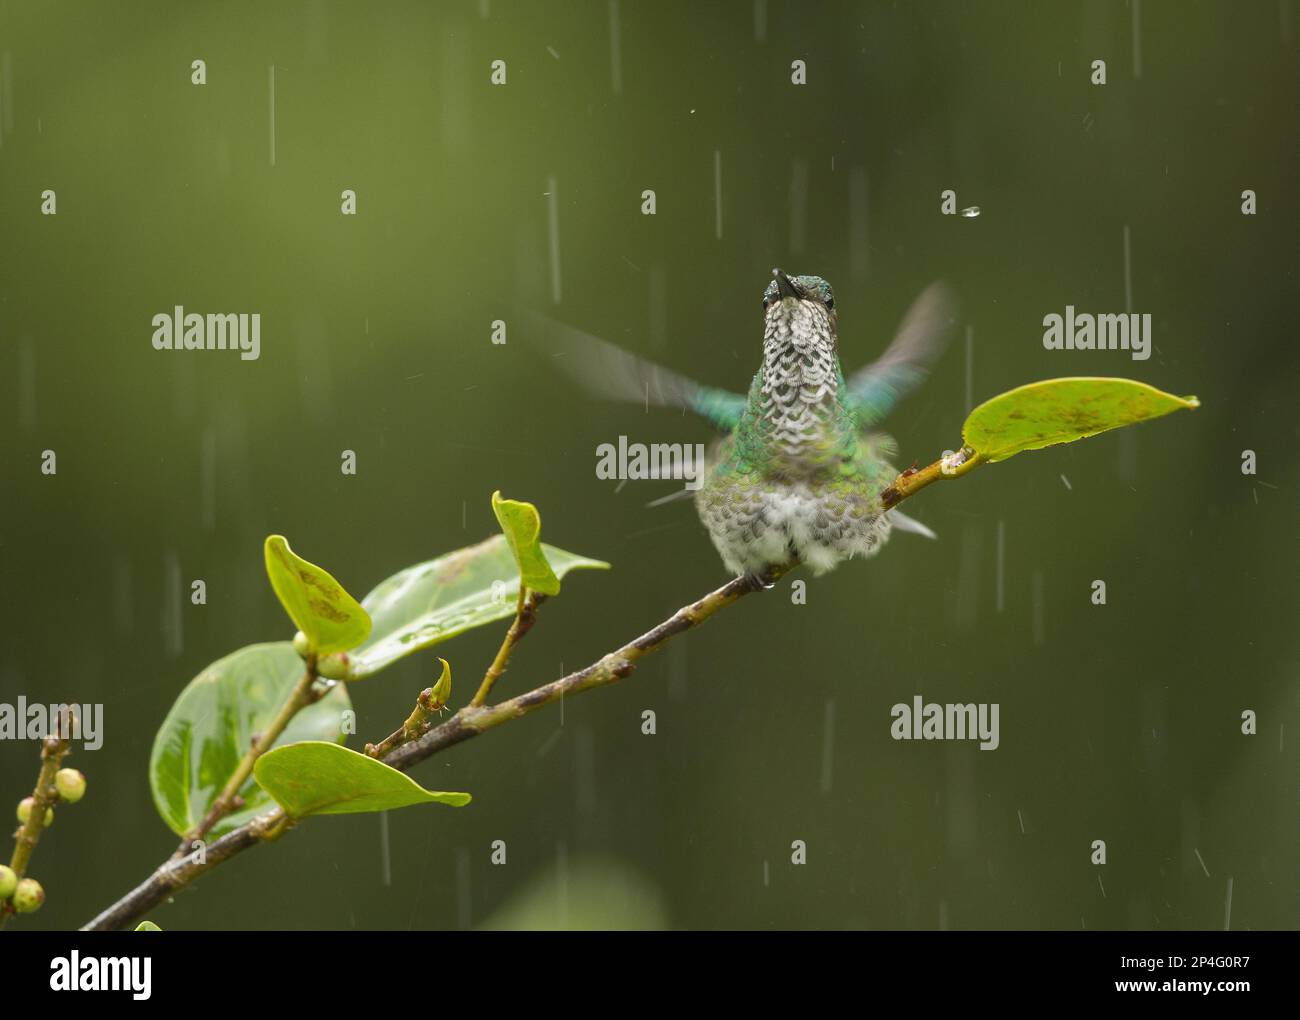 Green-crowned Hummingbird, Green-fronted Hummingbird, Green-crowned Hummingbird, Green-fronted Hummingbird, Green-fronted Hummingbird, Animals Stock Photo